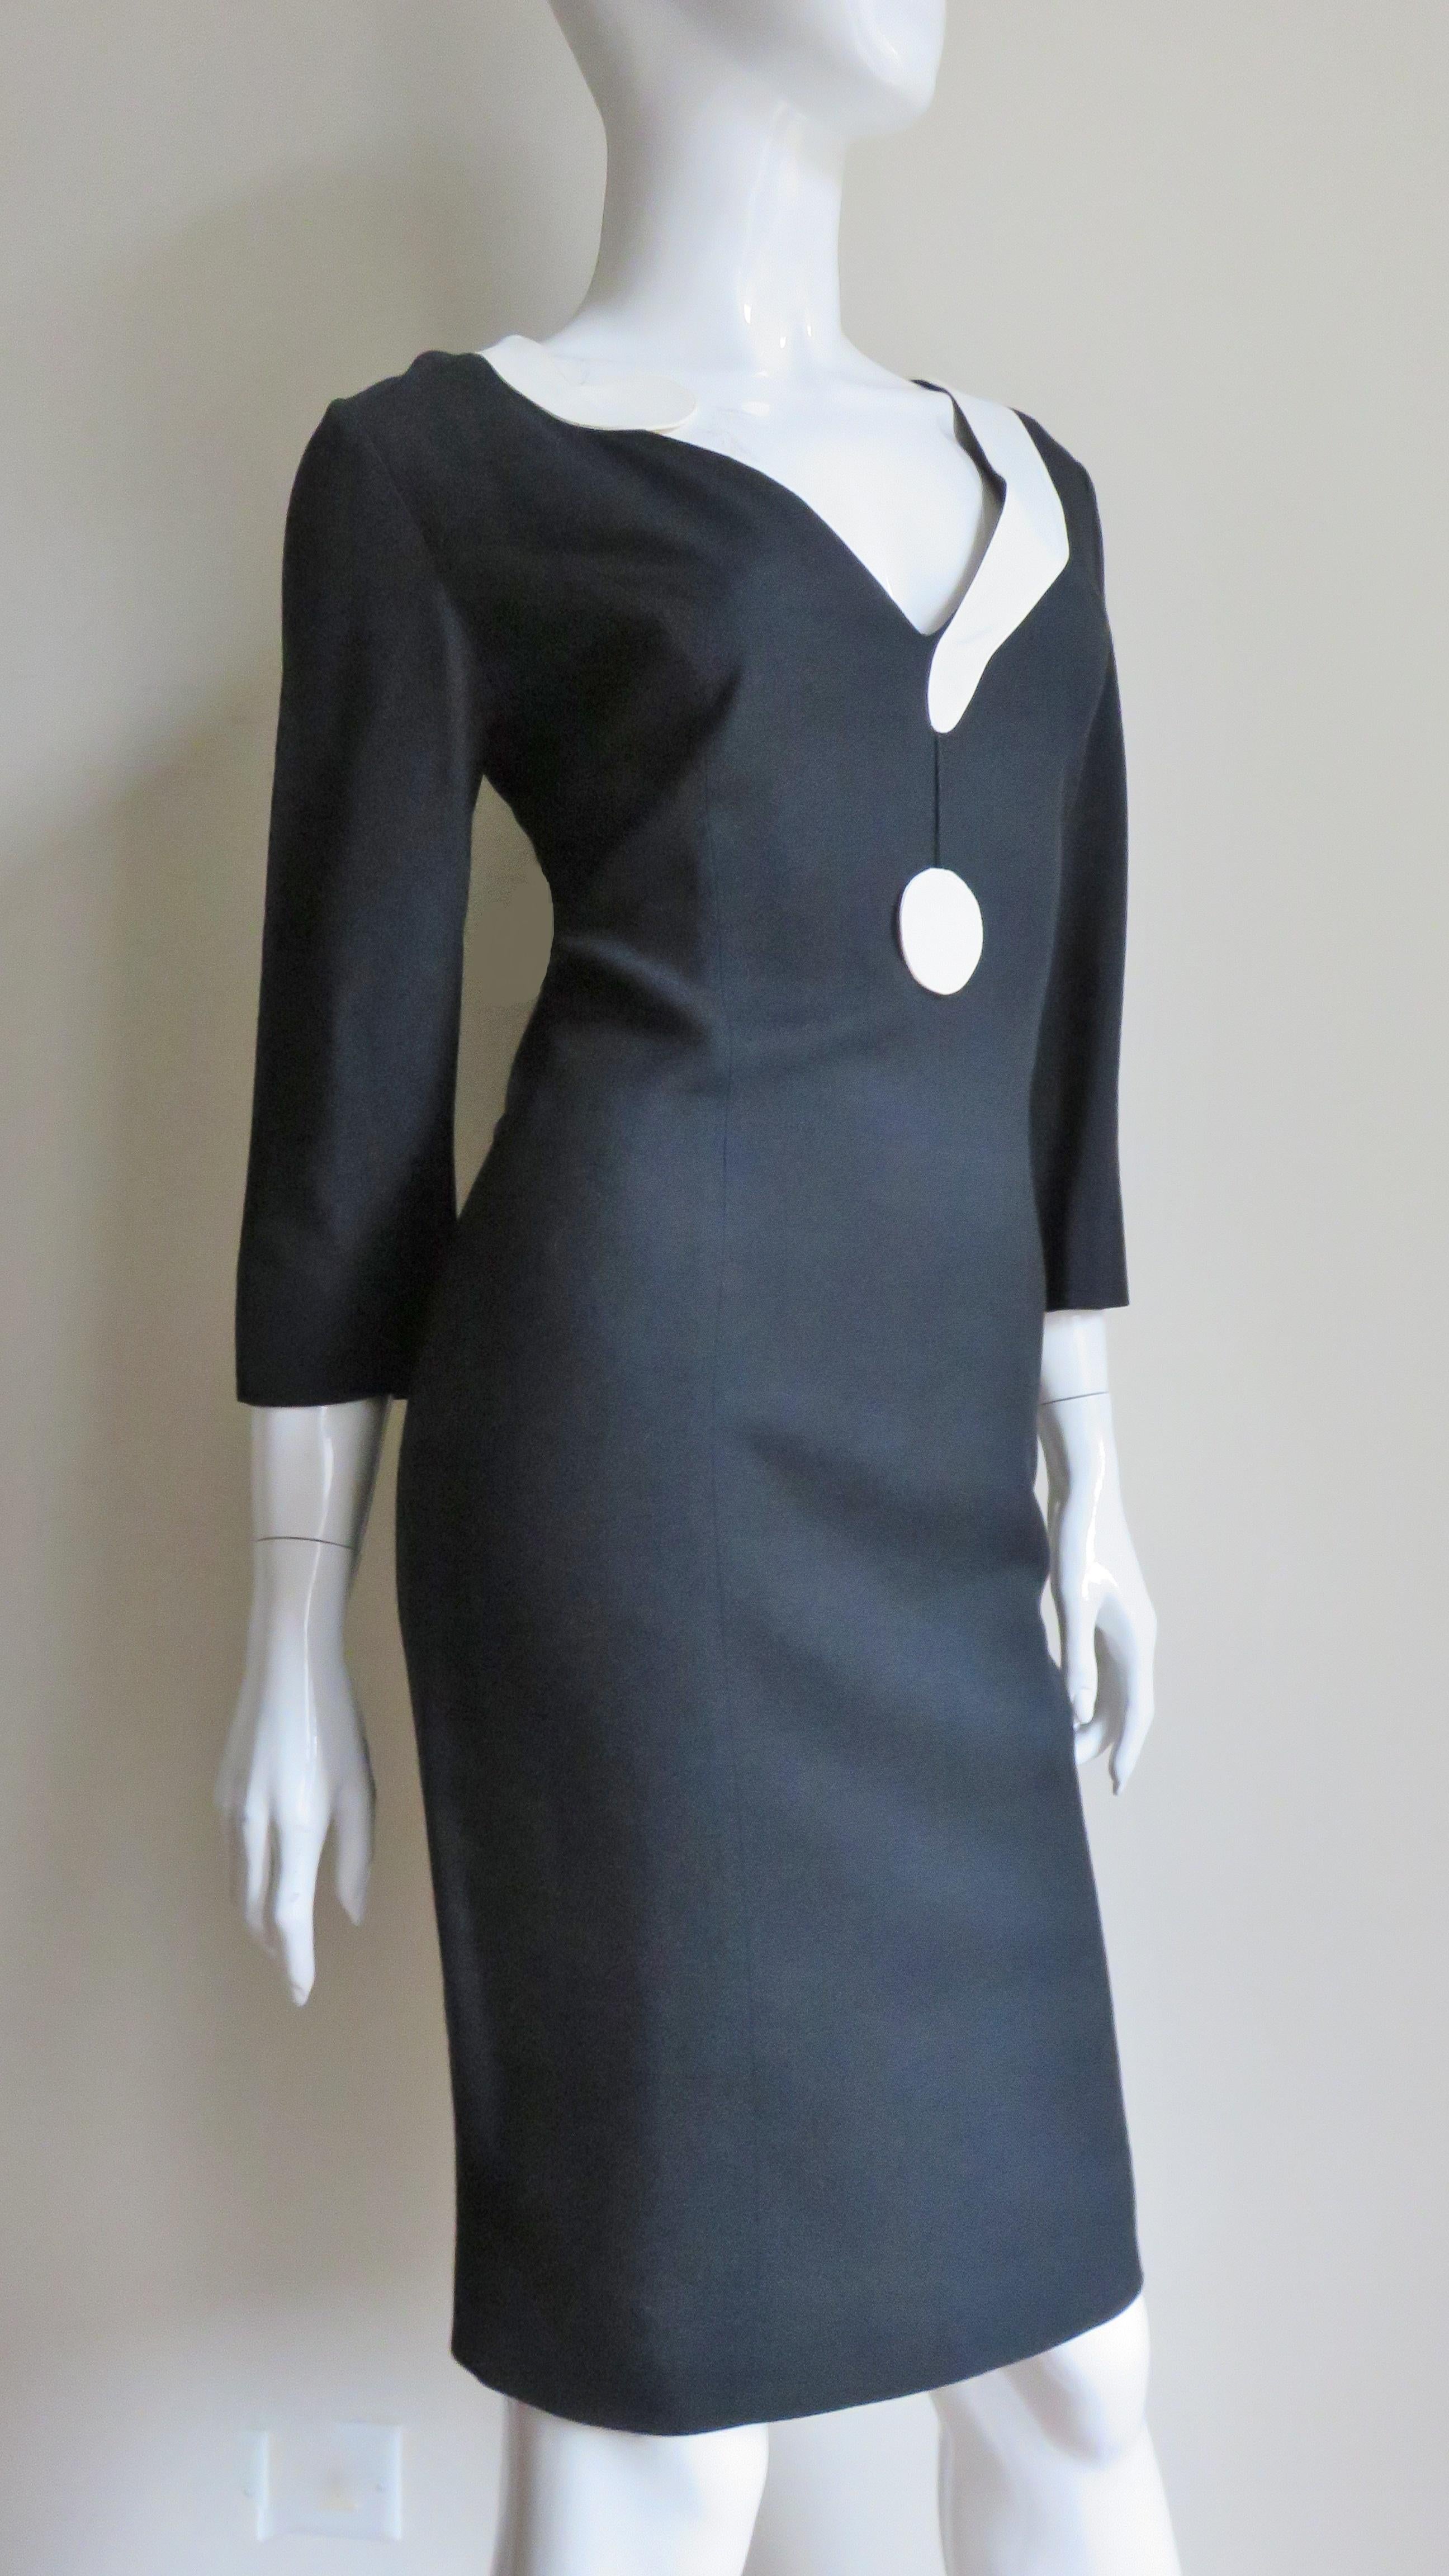 Moschino Couture Dress with Question Mark Collar A/W 1998 For Sale 5